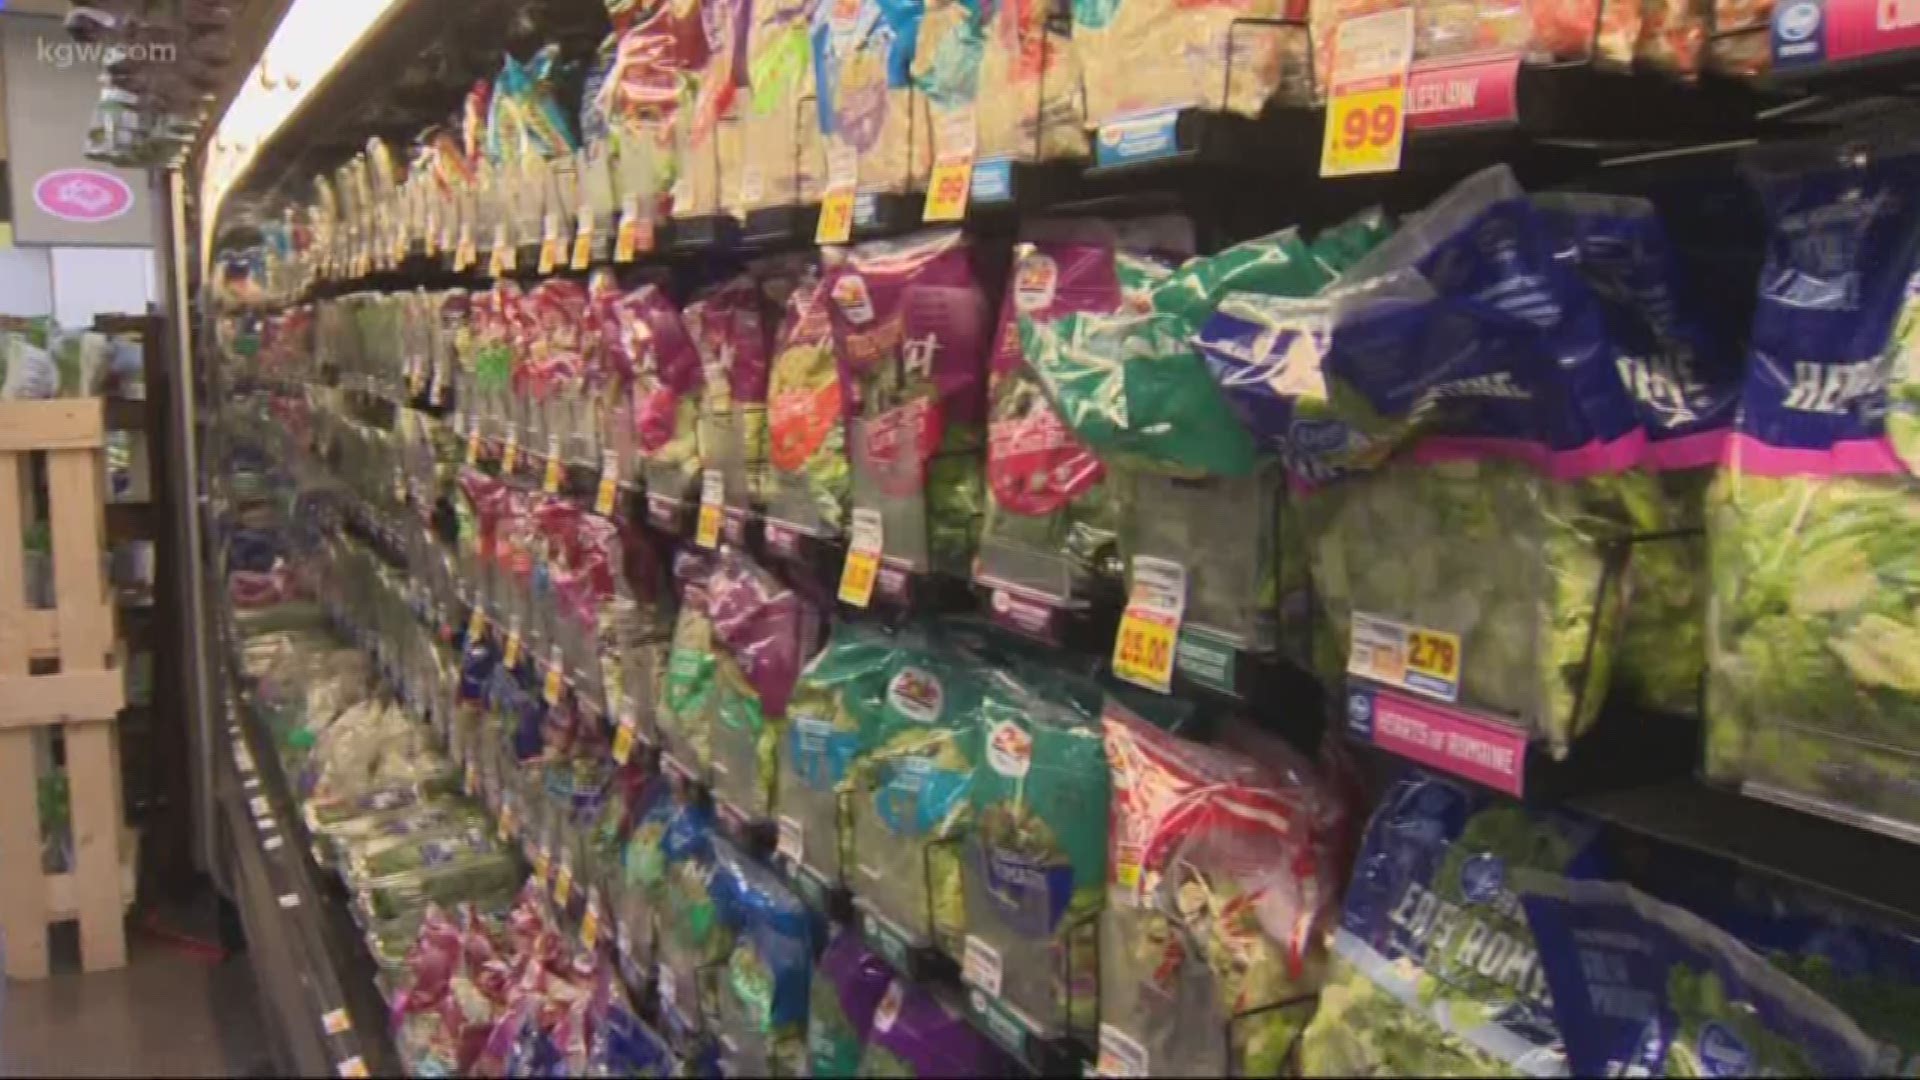 Stores are avoiding selling lettuce they believe may be tainted with E. coli